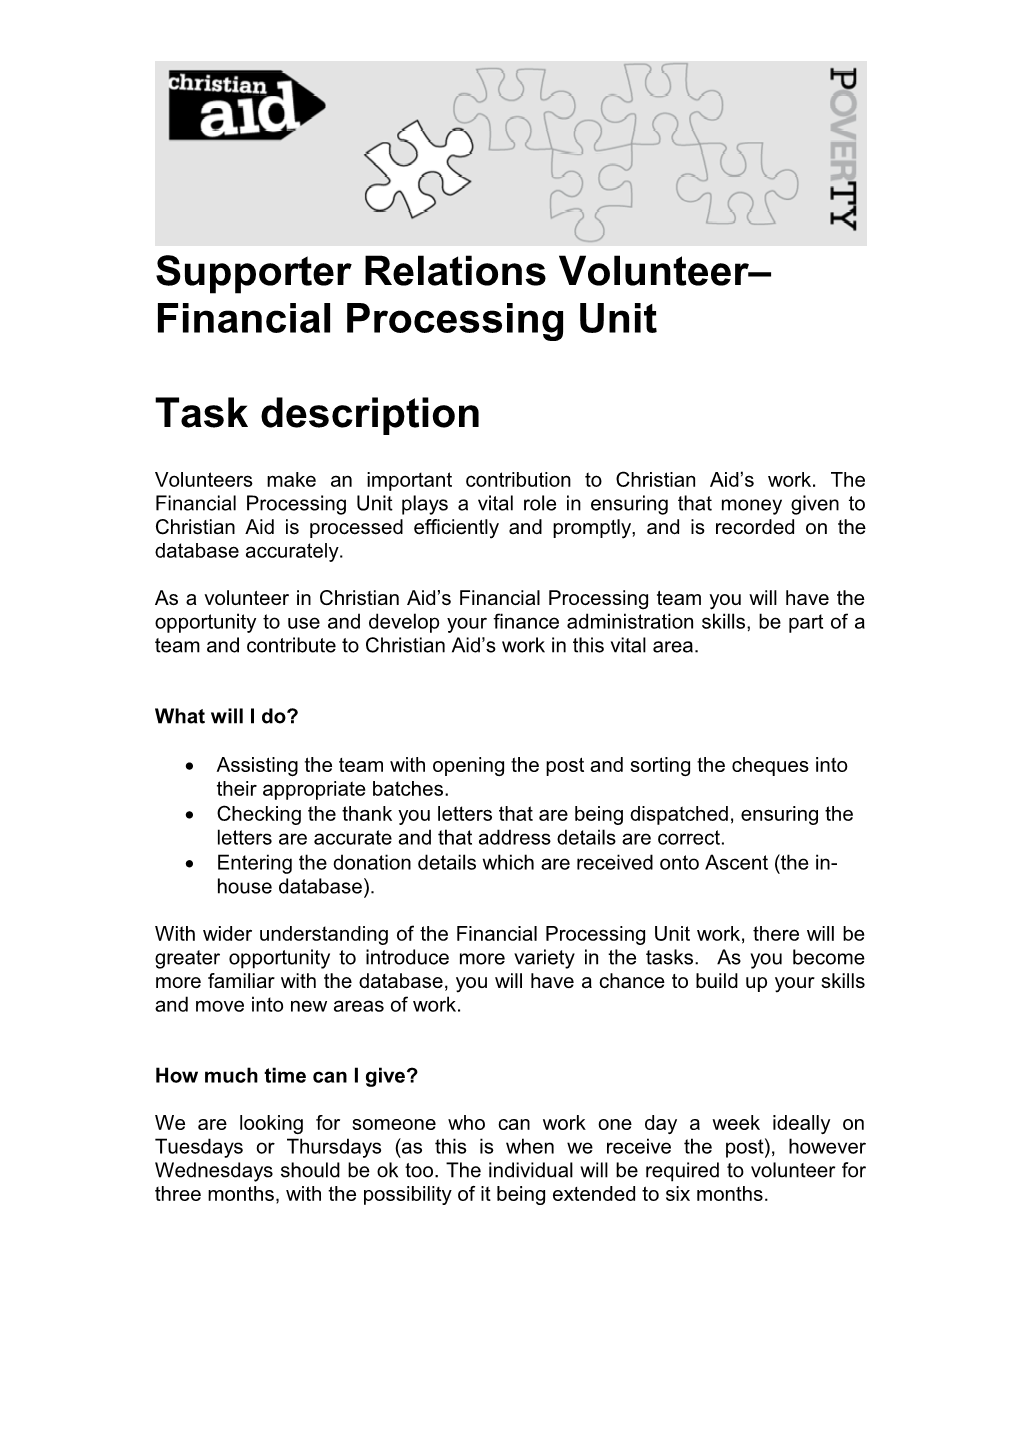 Supporter Relations Volunteer Financial Processing Unit